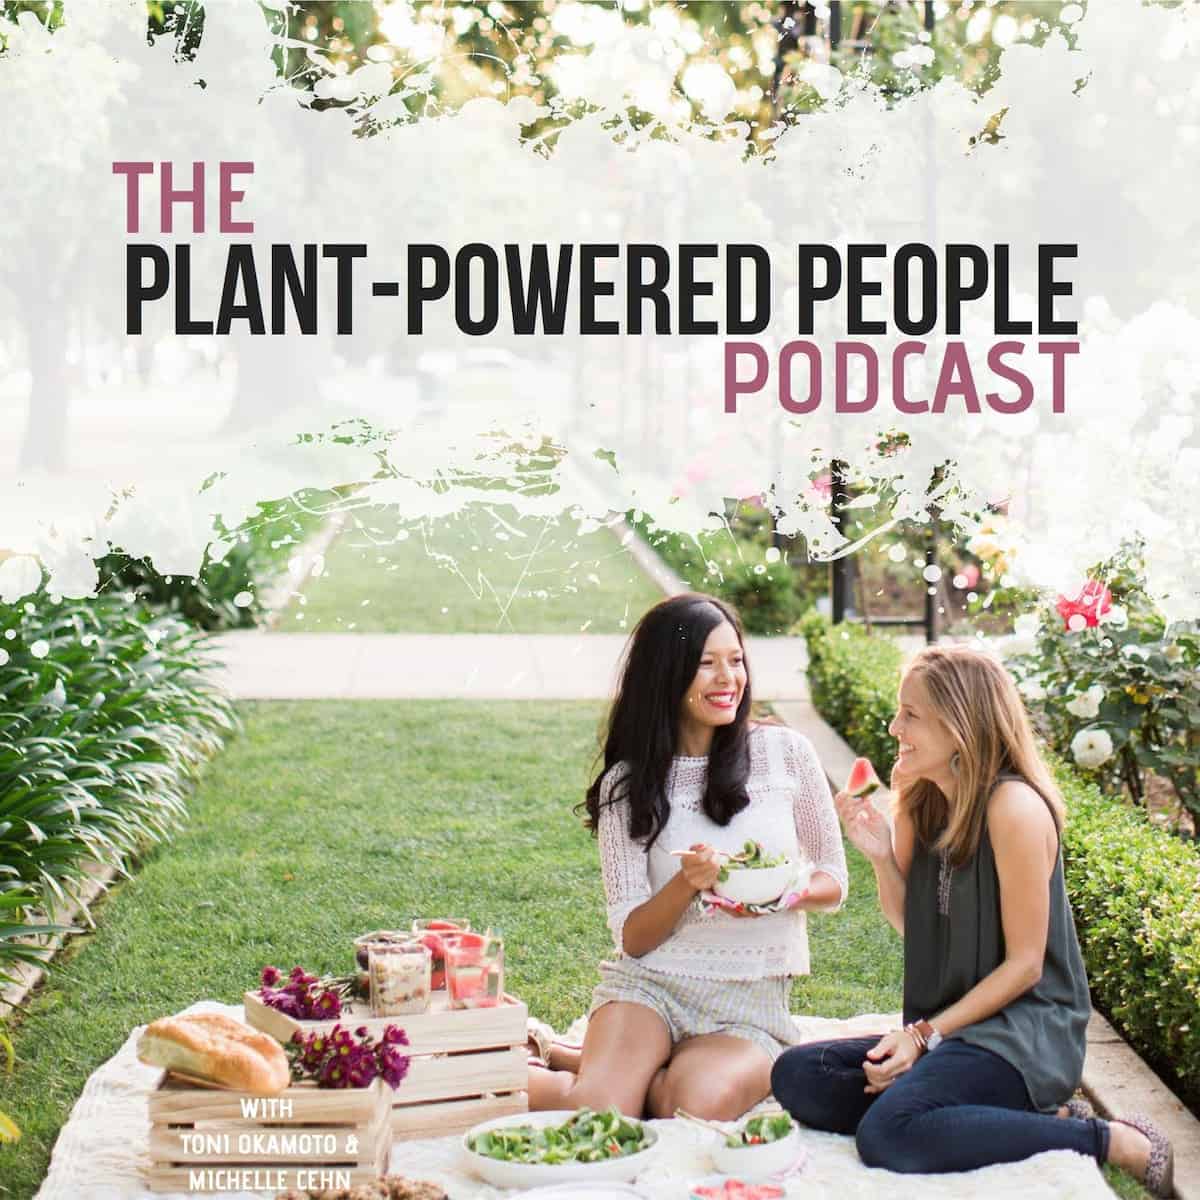 The Plant-Powered People podcast cover art.